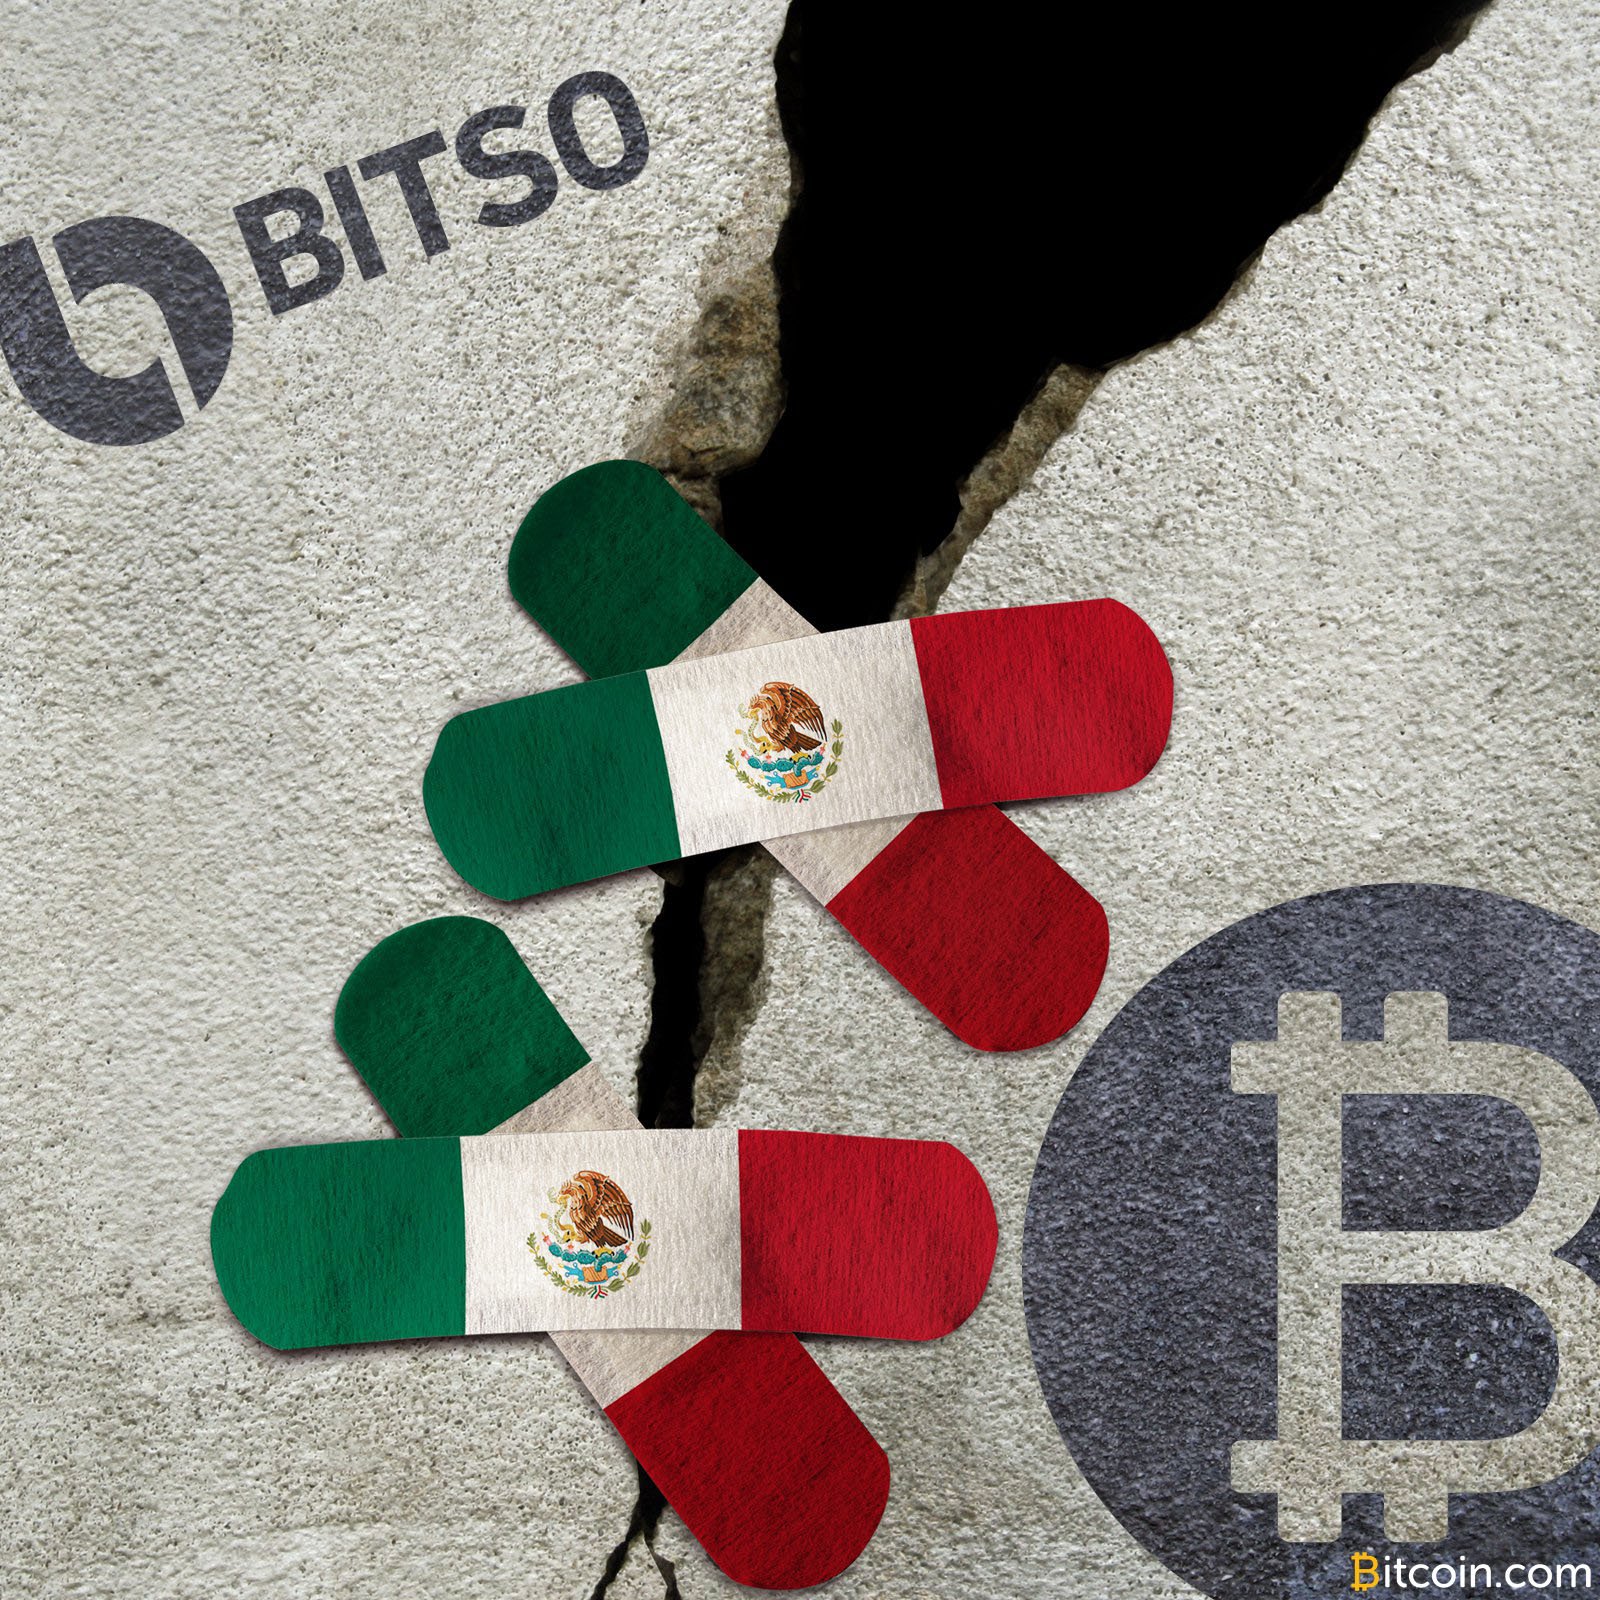 Bitso Exchange Raises Cryptocurrencies for Mexican Earthquake Victims